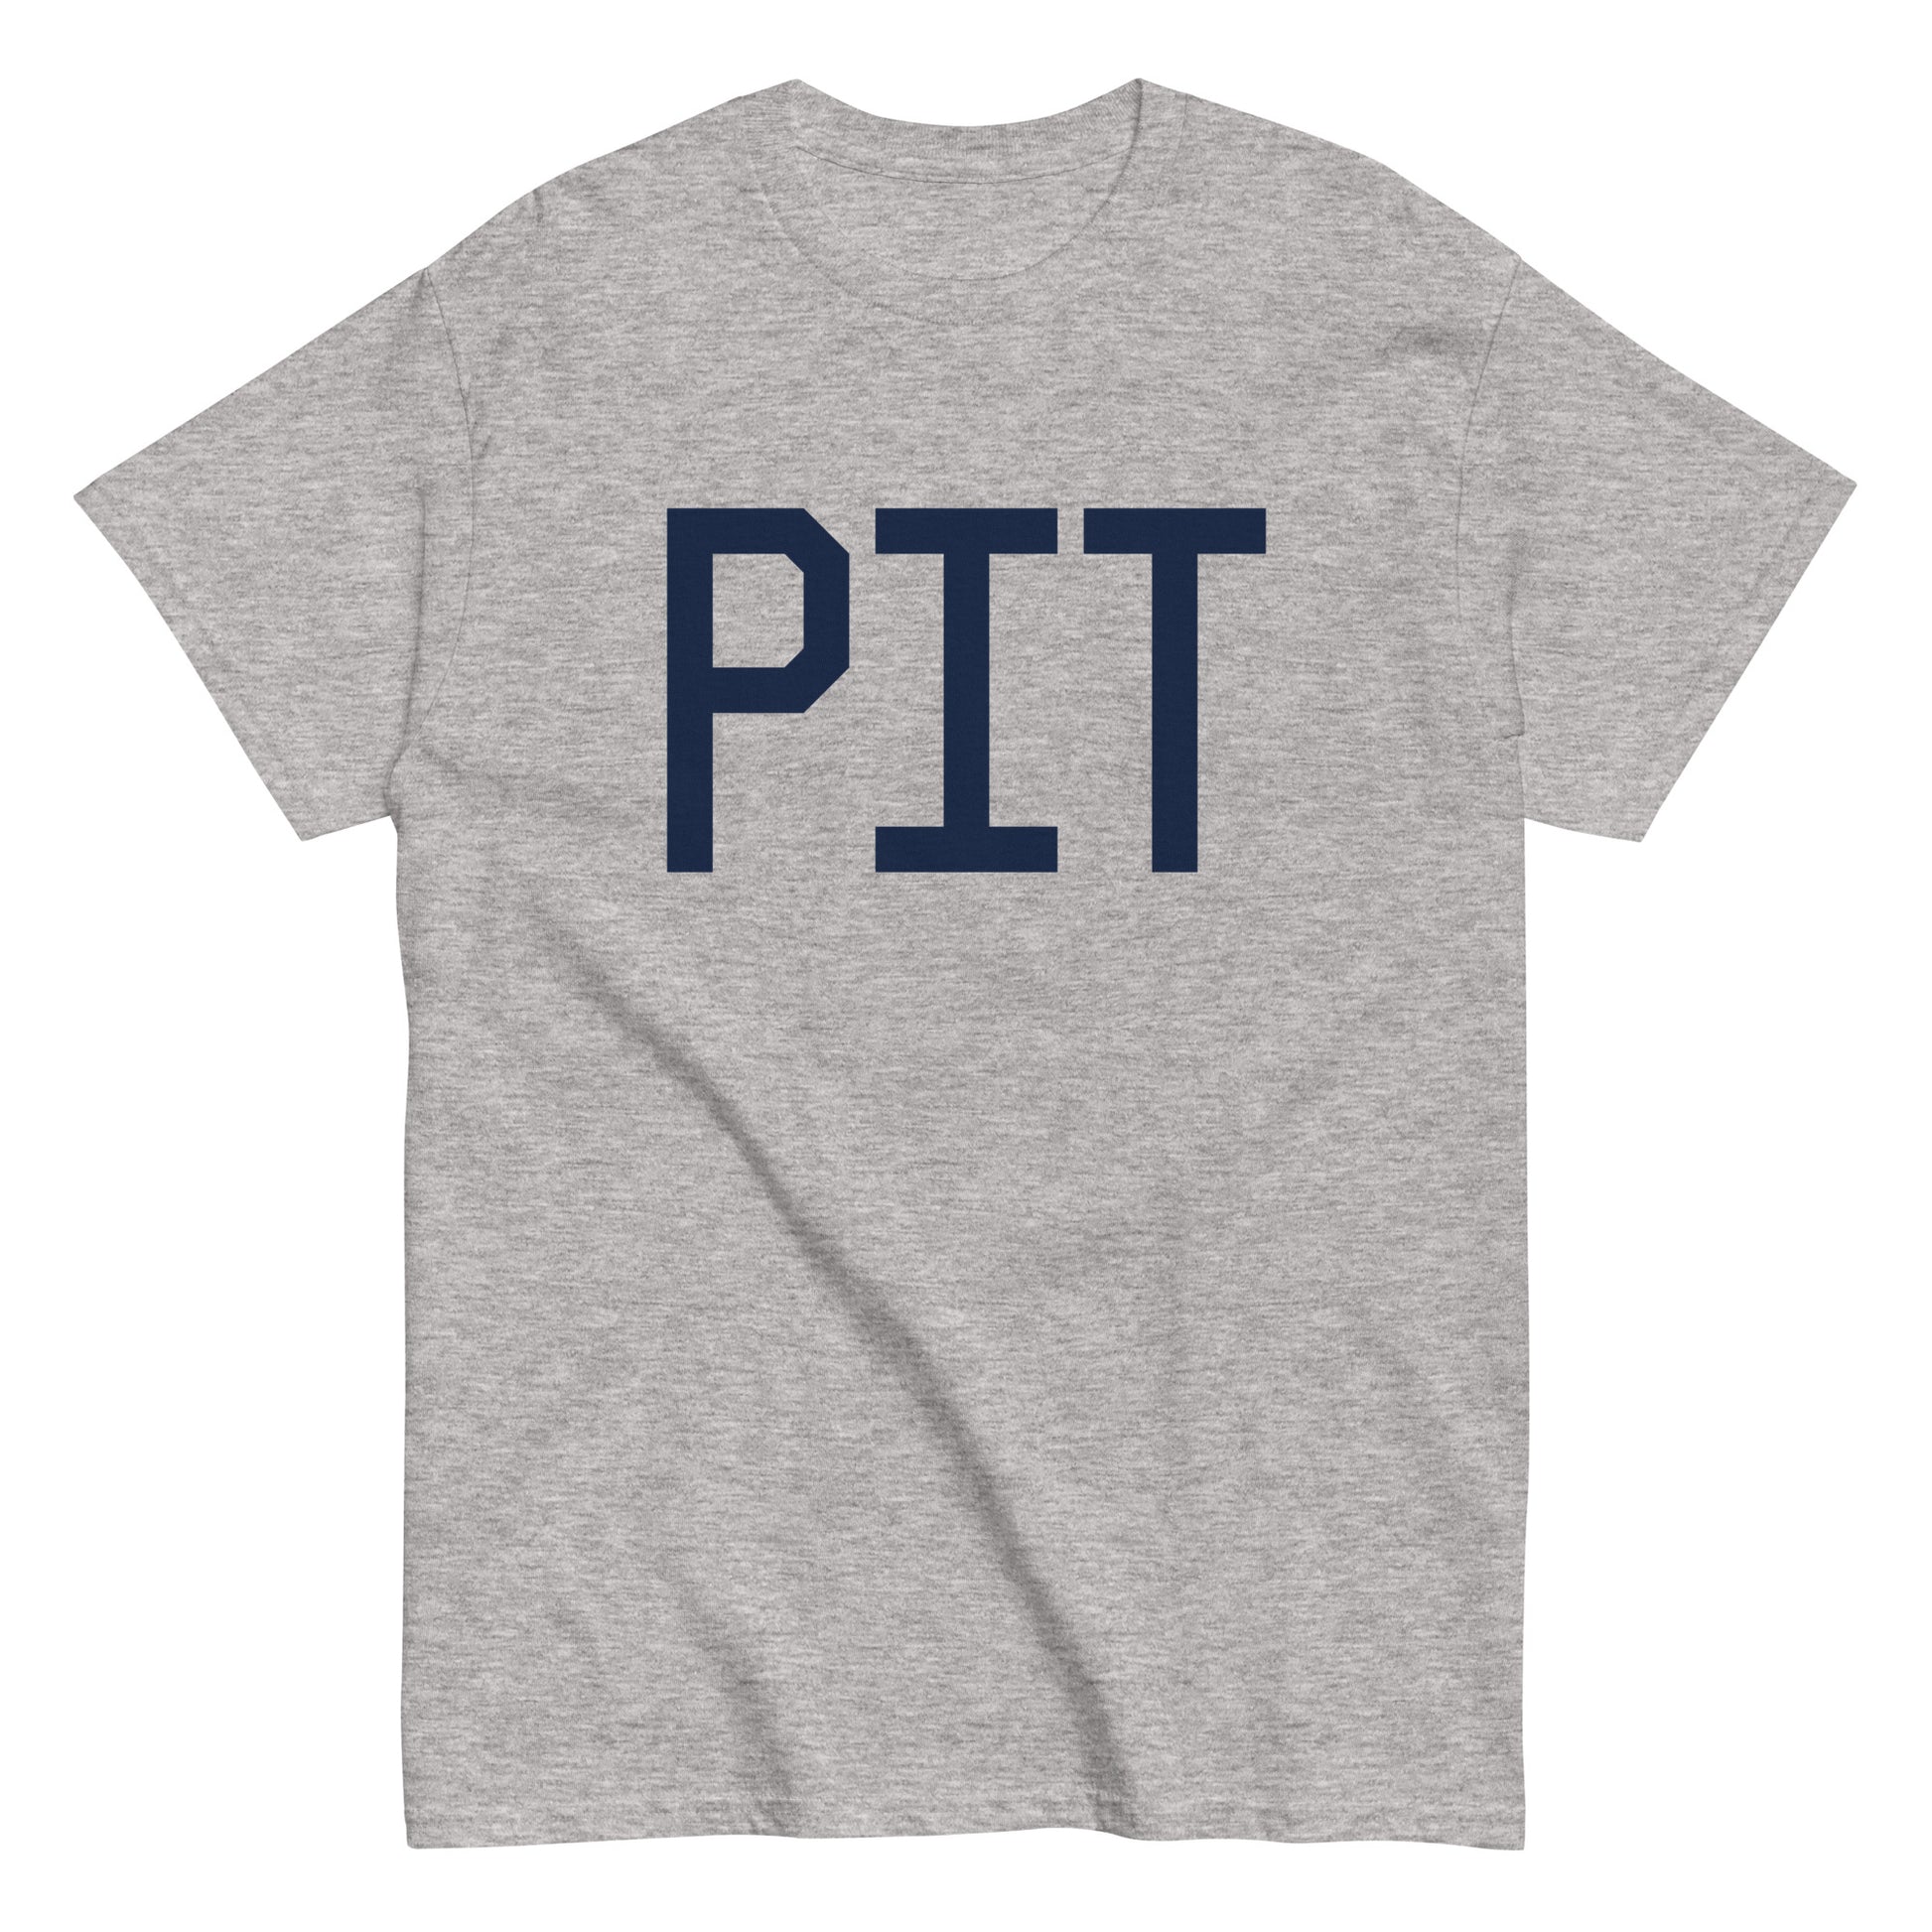 Aviation-Theme Men's T-Shirt - Navy Blue Graphic • PIT Pittsburgh • YHM Designs - Image 02